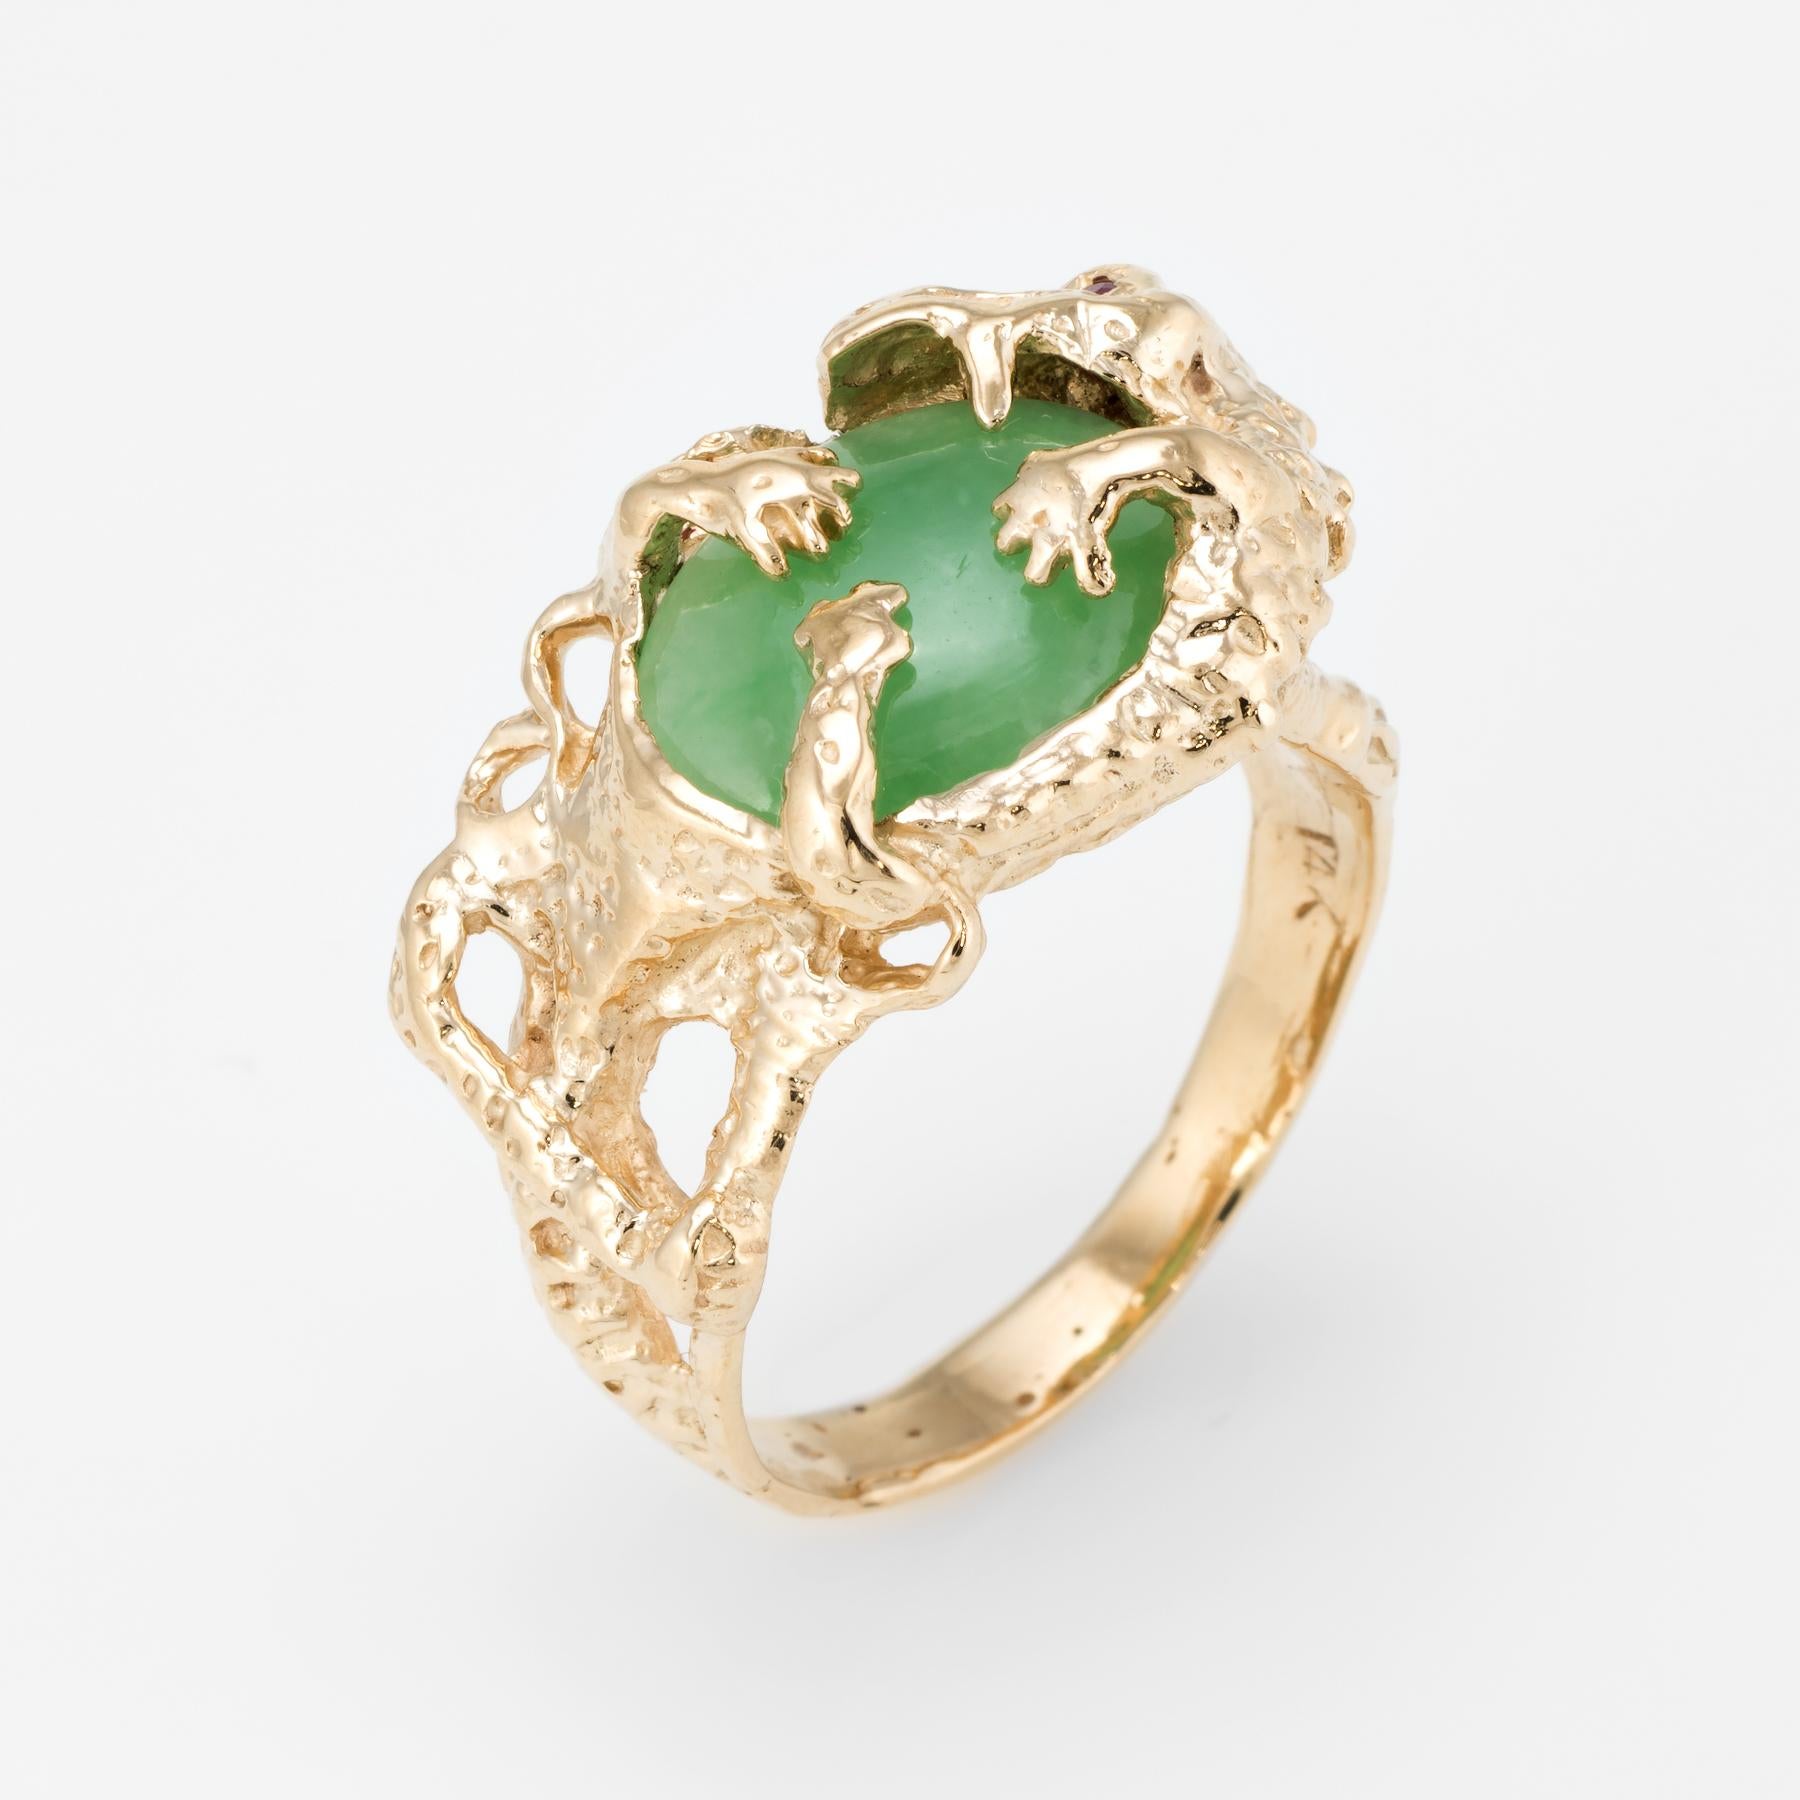 Finely detailed vintage cocktail ring, crafted in 14 karat yellow gold. 

Centrally mounted cabochon cut jade measures 13mm x 10mm (estimated at 7 carats). One approx. 0.02 carat garnet is set into the eye. The jade is in excellent condition and